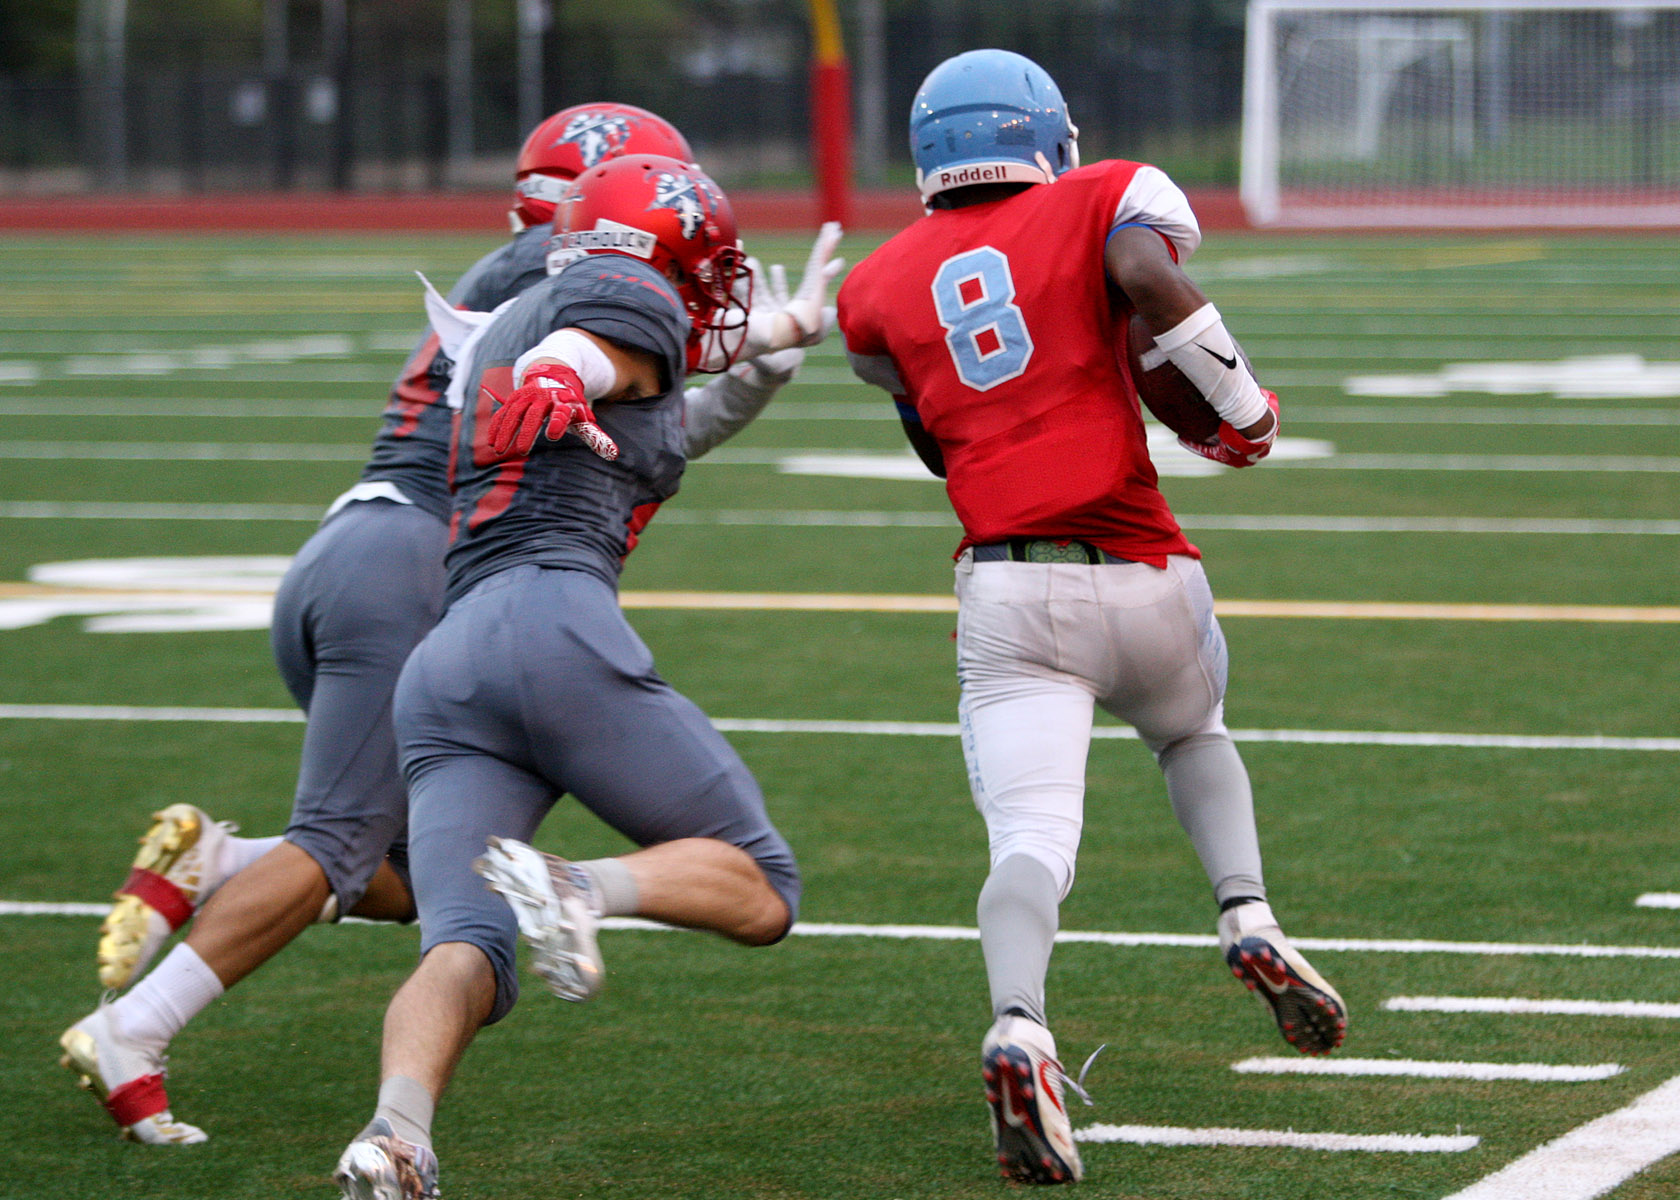 Dontea McMillan of Chief Sealth heads up the sideline against defensive pursuit by Kennedy's Shane Aleaga and Garret Kollar.